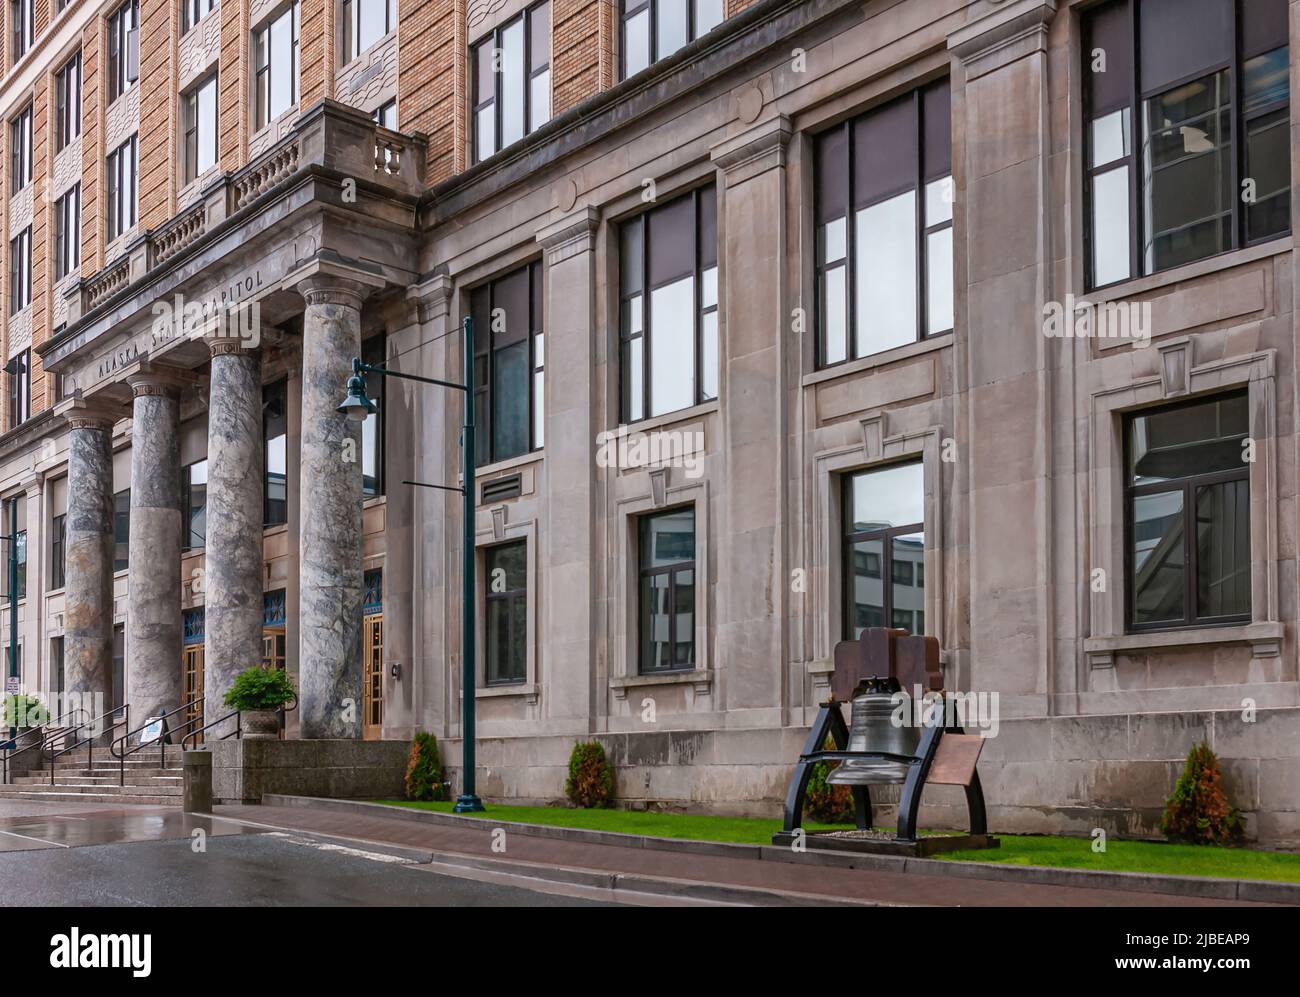 Juneau, Alaska, USA - July 19, 2011: Front facade with main entrance and Liberty bell of Alaska State Capitol. Stock Photo